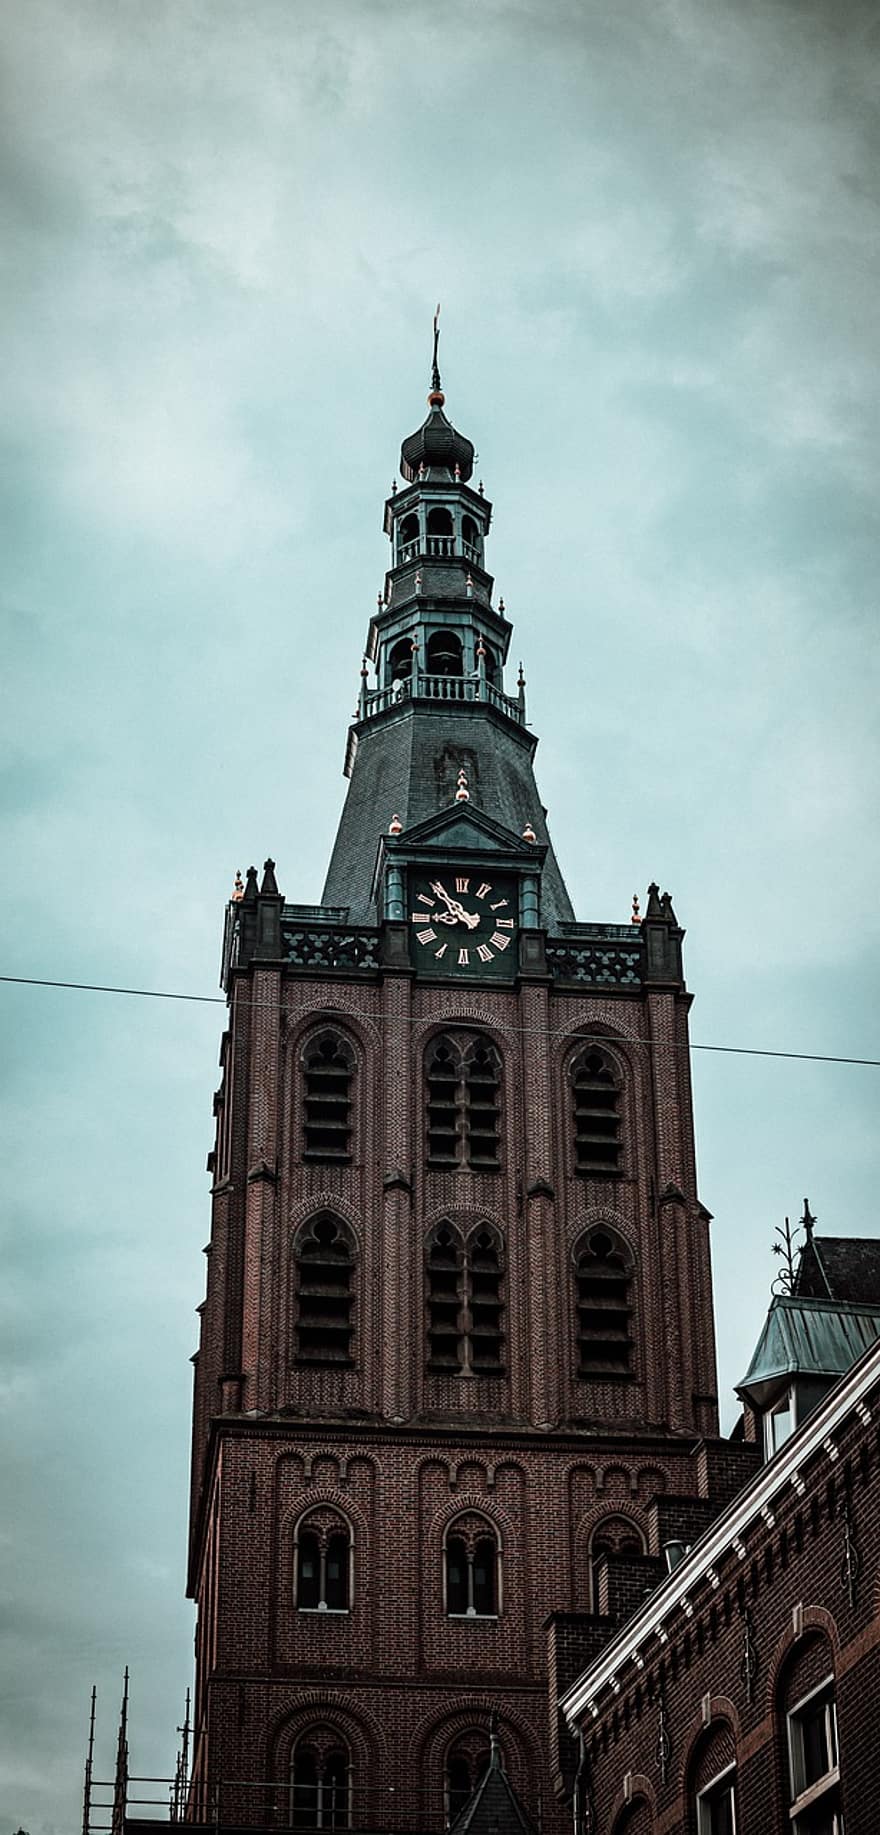 Church, Old, Architecture, Tower, Clock, Building, Church Tower, Sacral Architecture, Religion